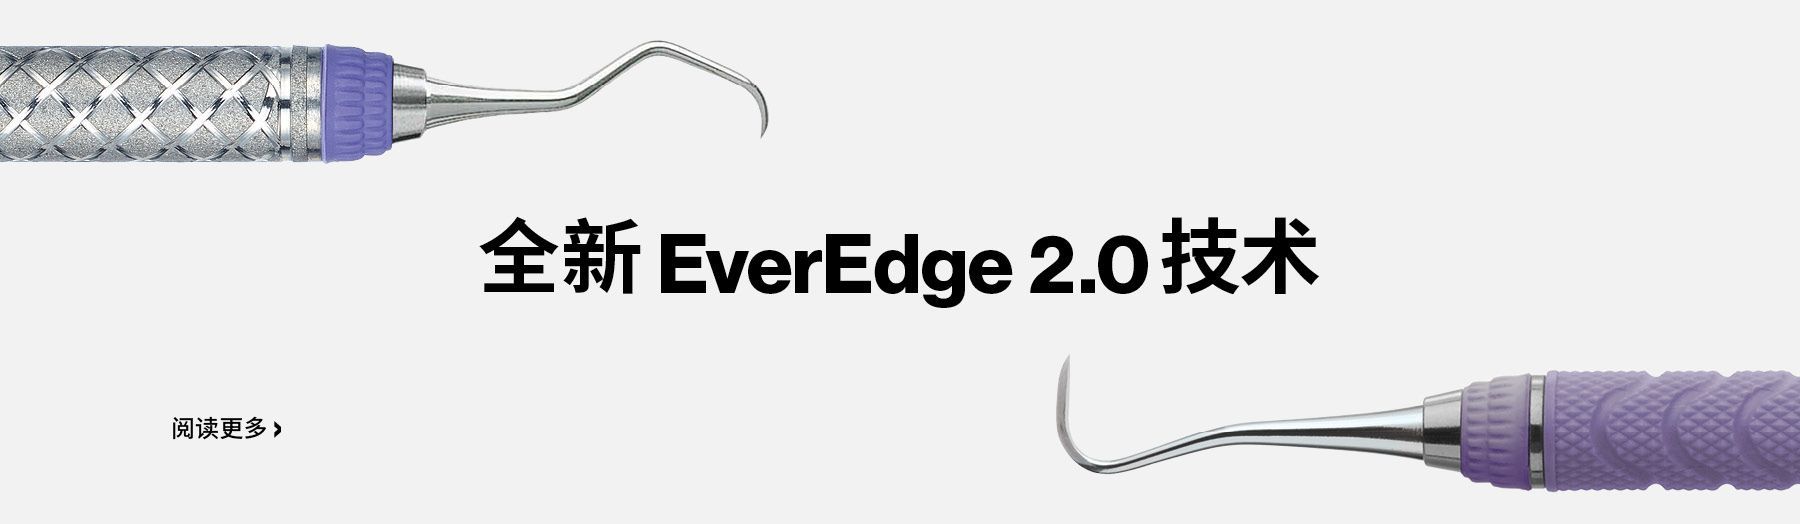 evereded 2.0.